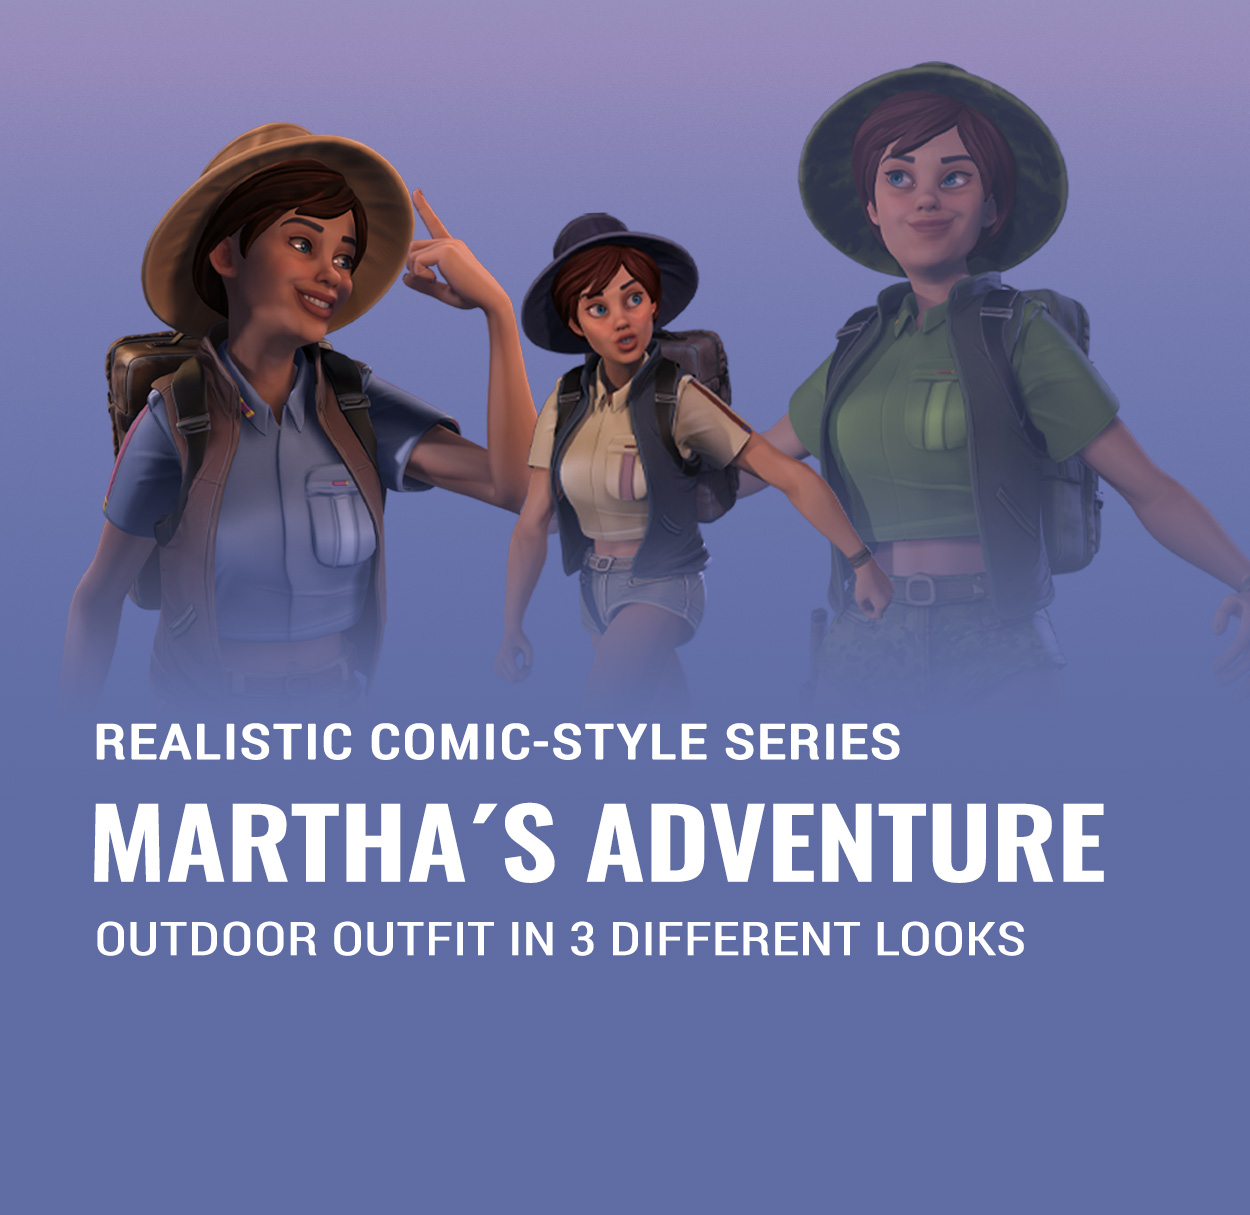 3d Adventure Outfits and Gears Combo-Martha